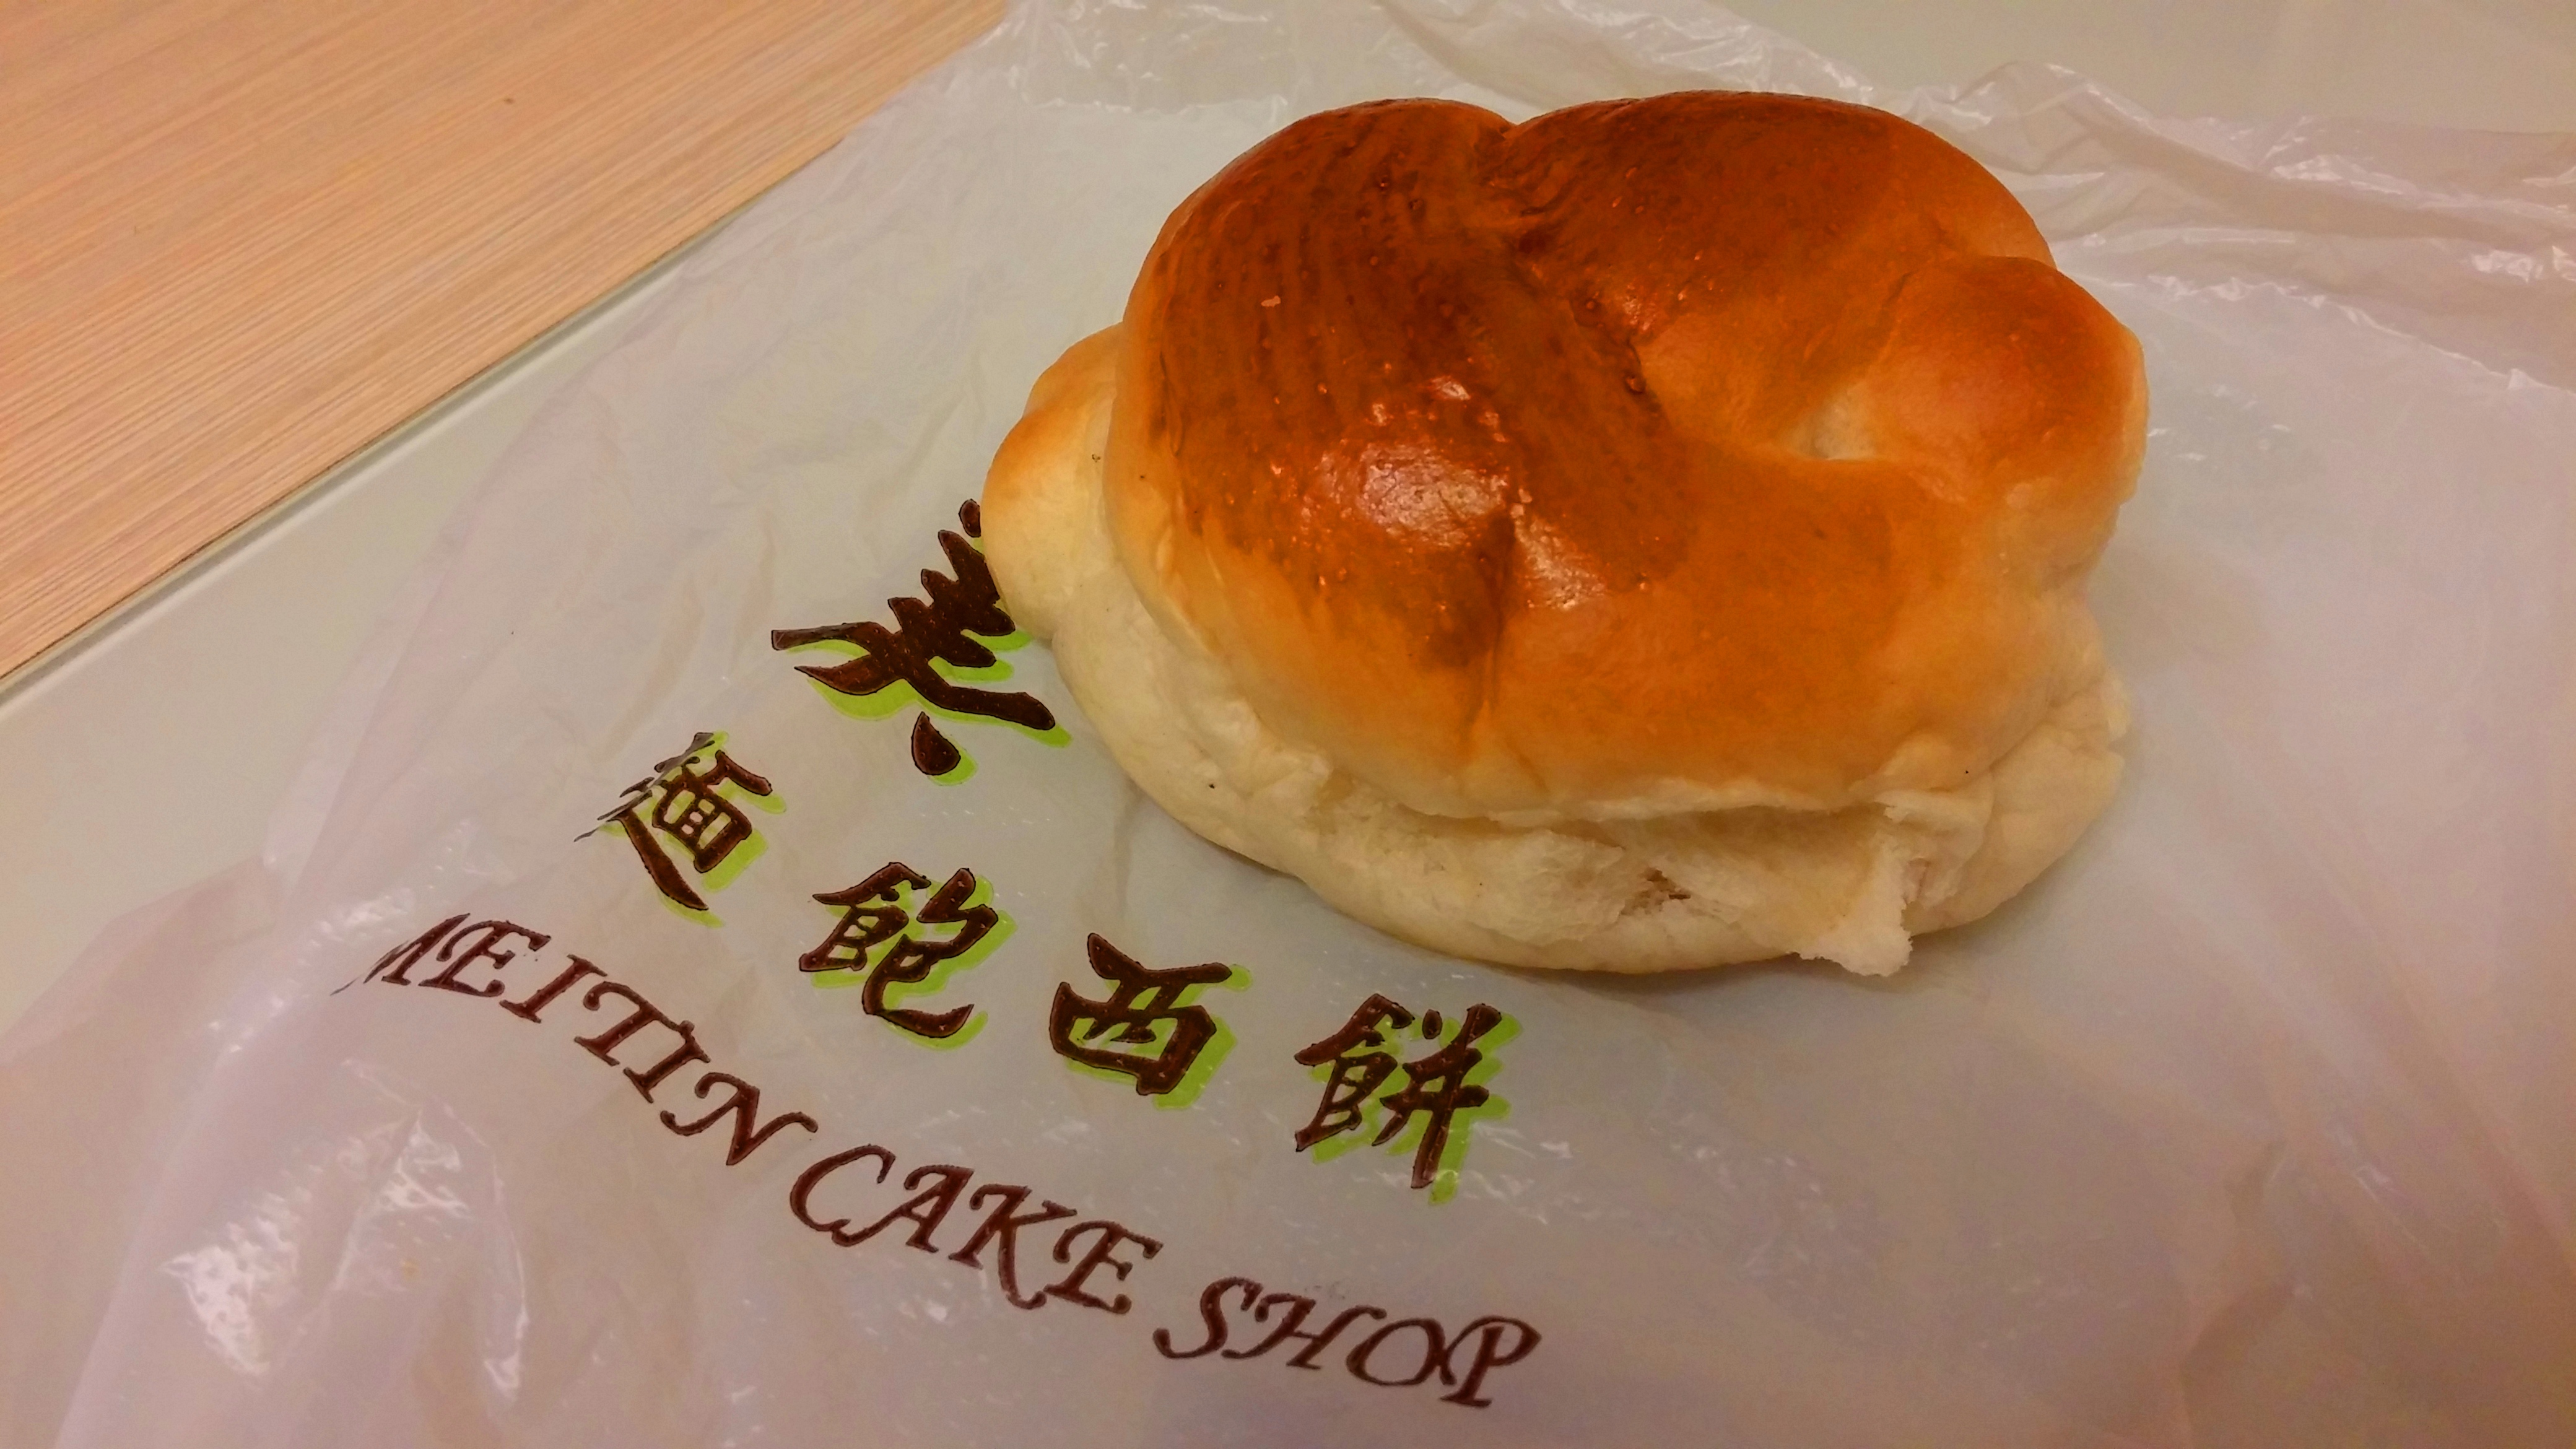 Quick and simple breakfast for many Hong Kong citizens, a bun